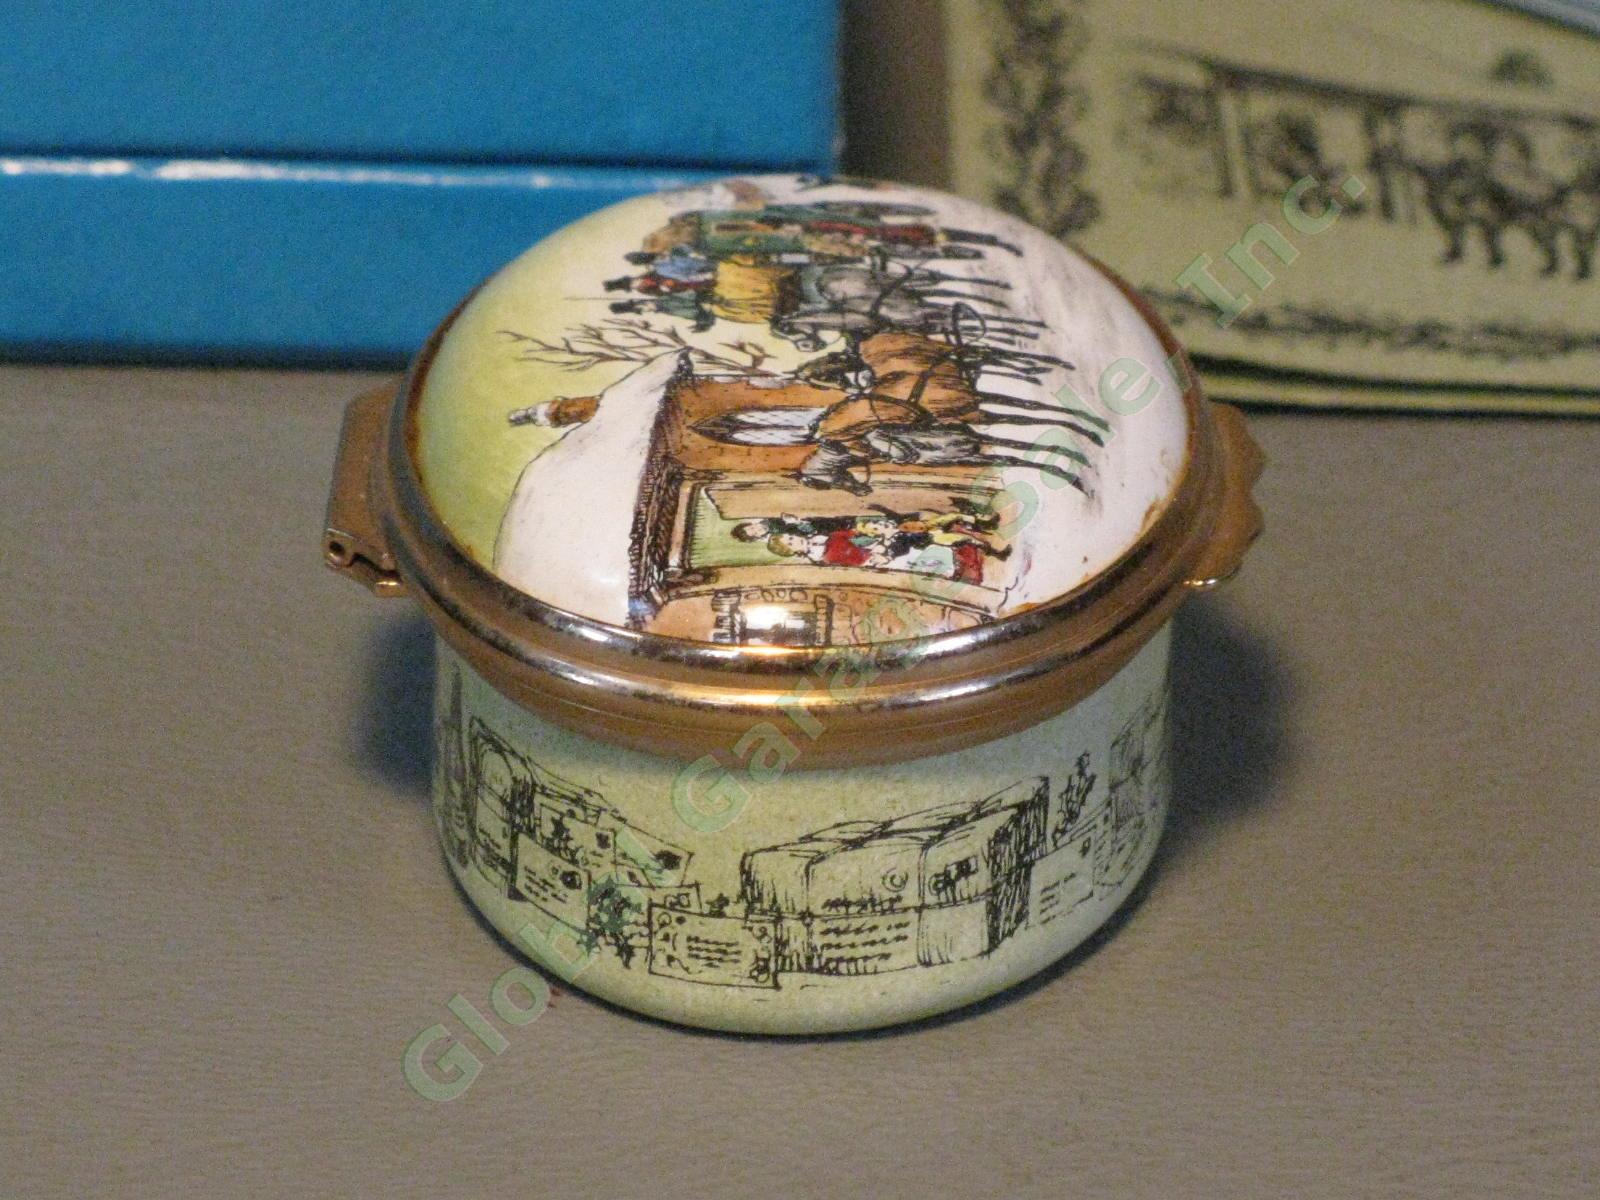 Limited Edition 1977 Halcyon Days Delivering Christmas Mail Enamel Trinket Box 5